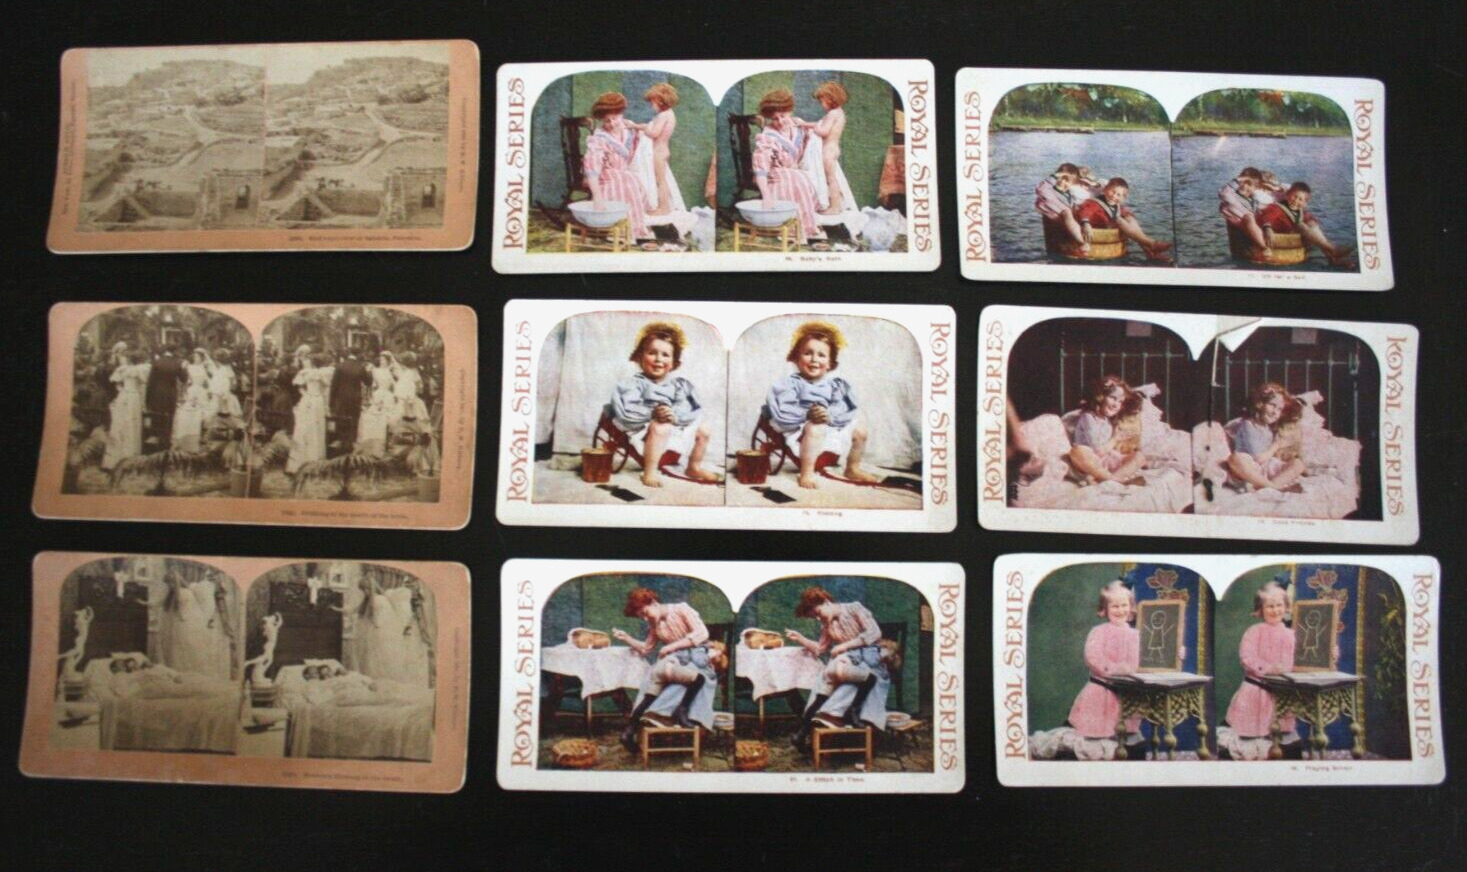 Lot of 9 Stereo Viewer Stereoscope Cards Slides Various Scenes.